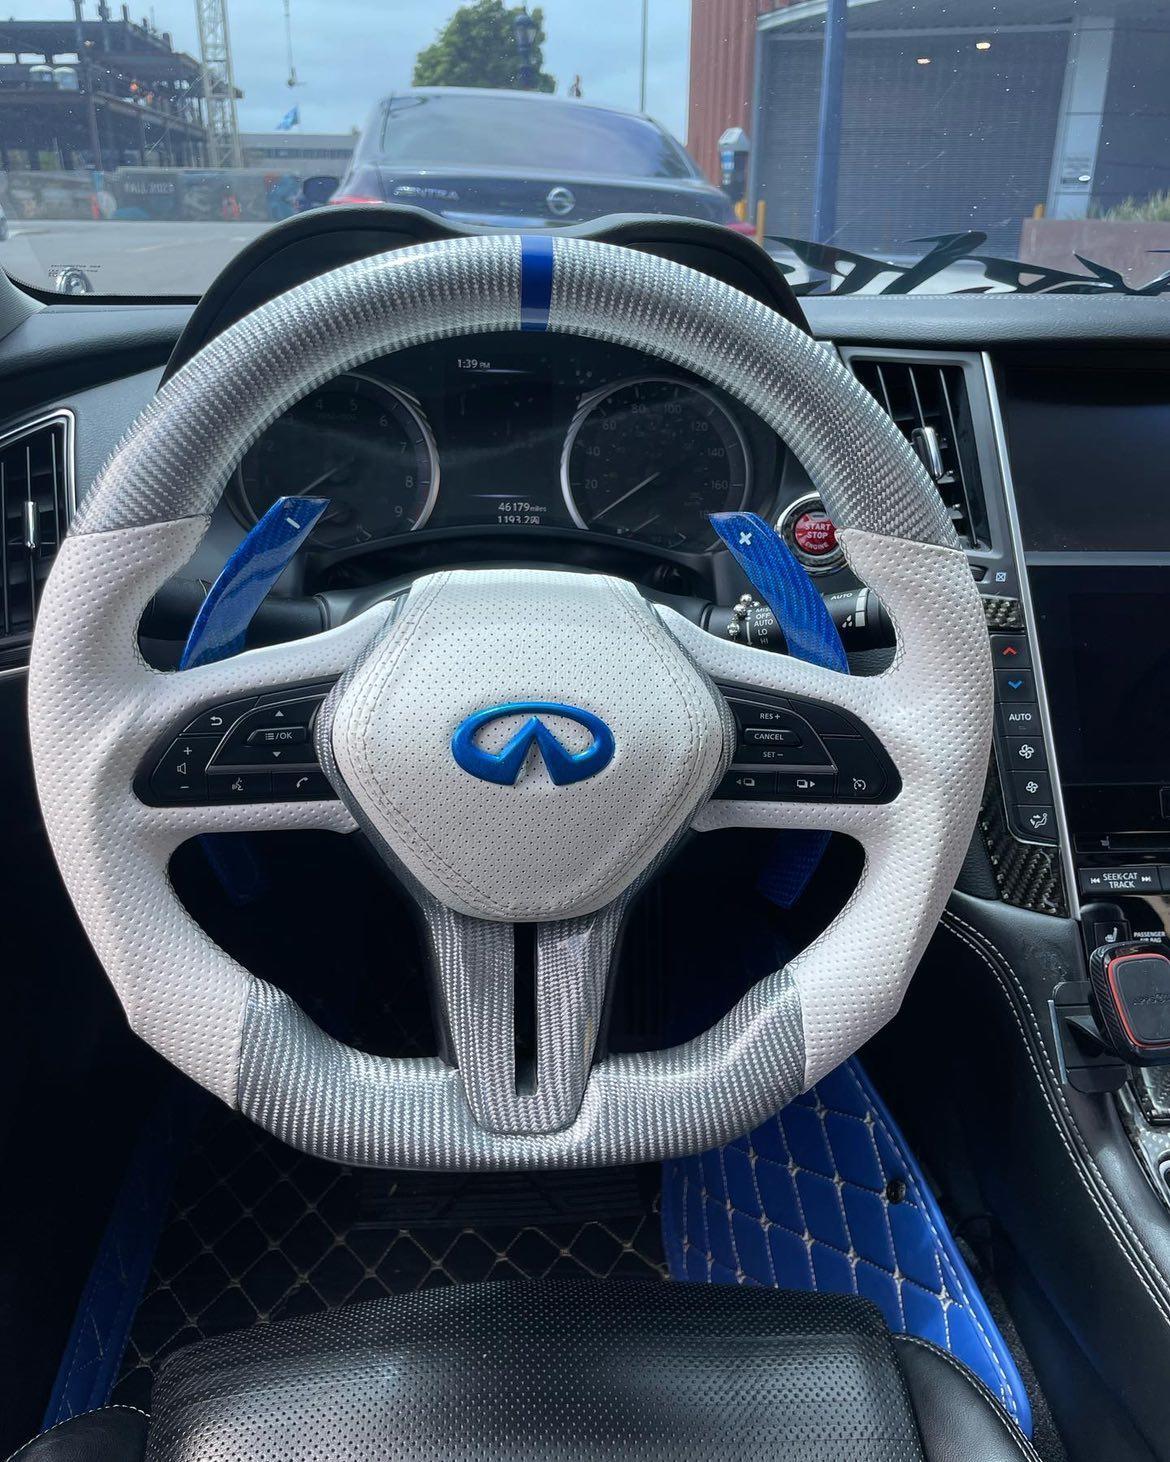 Jalisco's white carbon fiber steering wheel with emblem and stripe for Infiniti Q50/Q60.